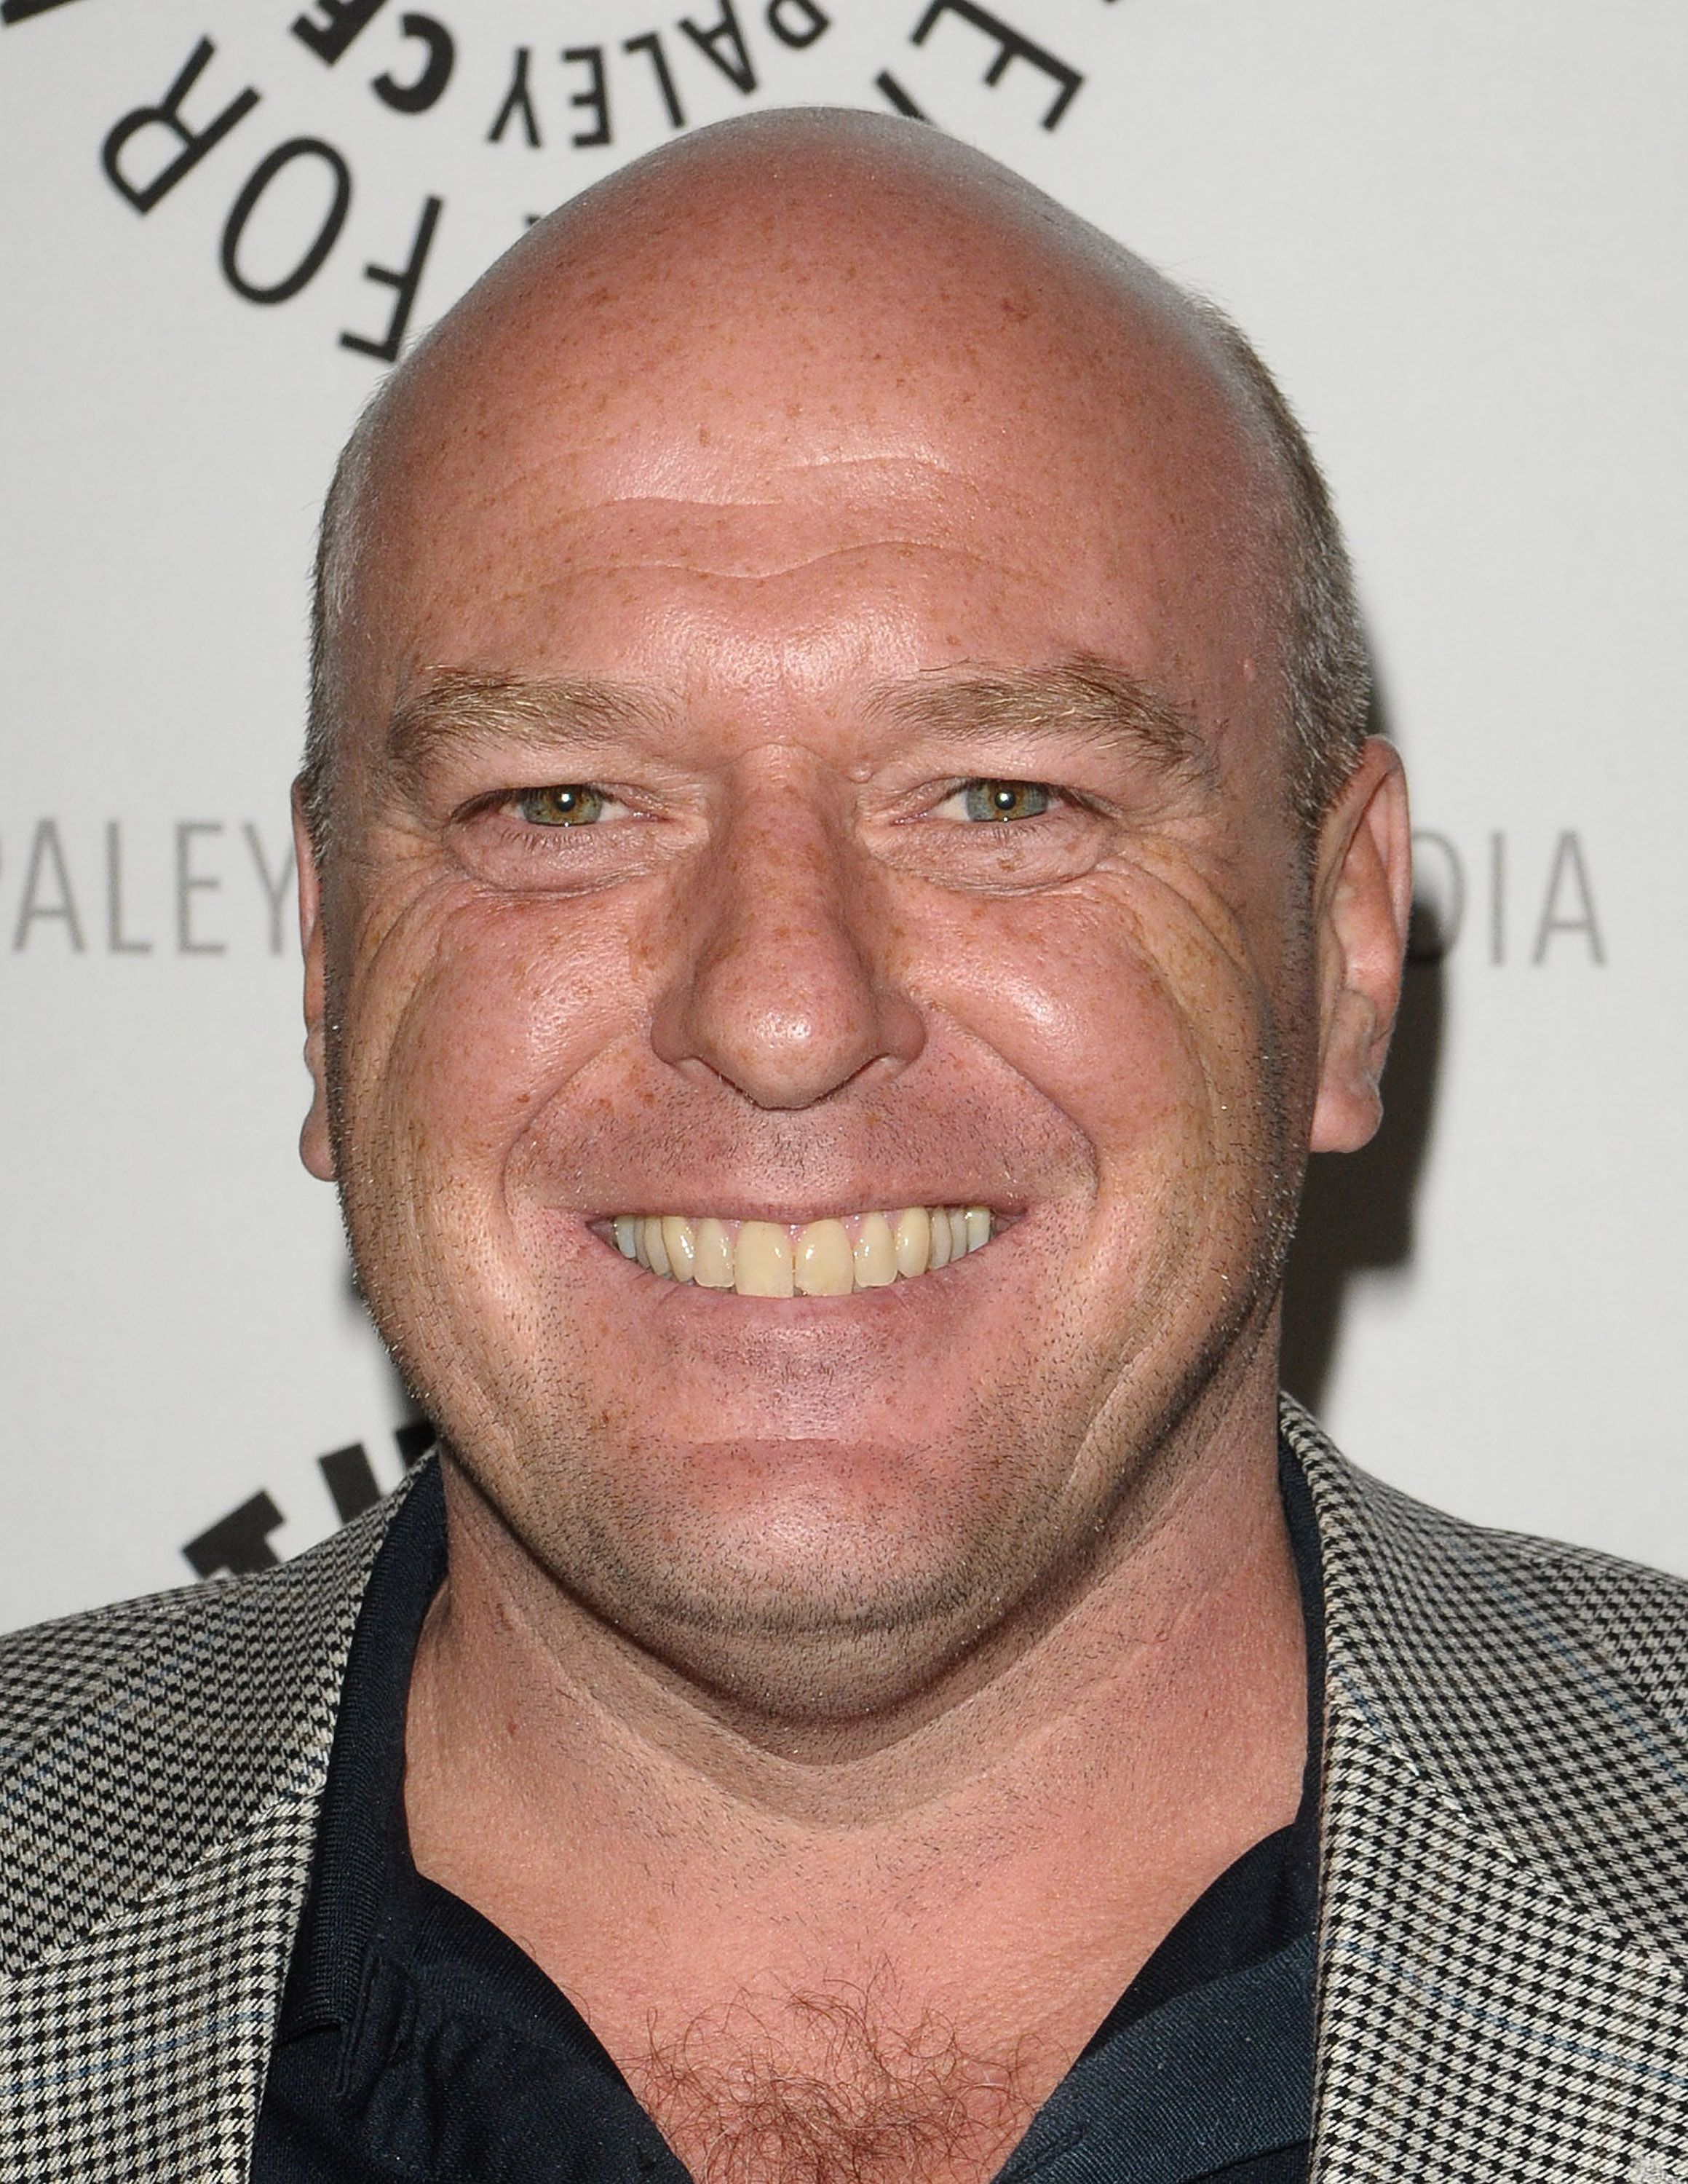 https://hips.hearstapps.com/hmg-prod/images/actor-dean-norris-attends-the-breaking-bad-event-at-the-news-photo-1693845380.jpg